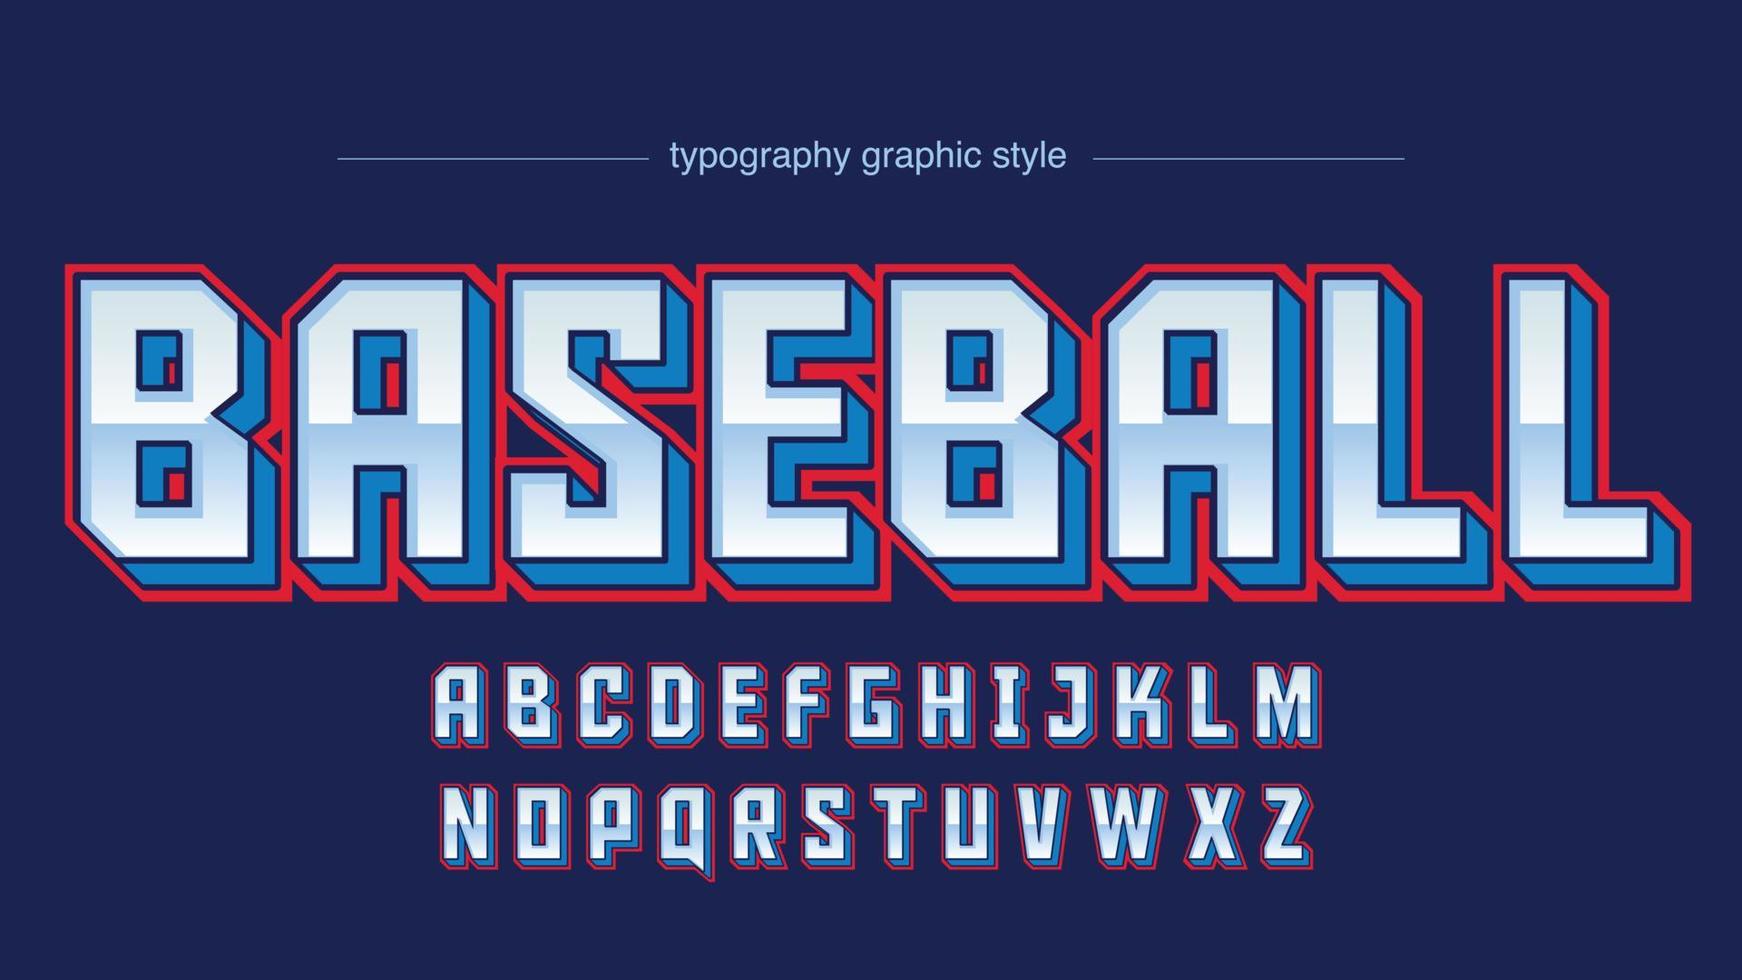 chrome blue and red uppercase 3d sports typography vector